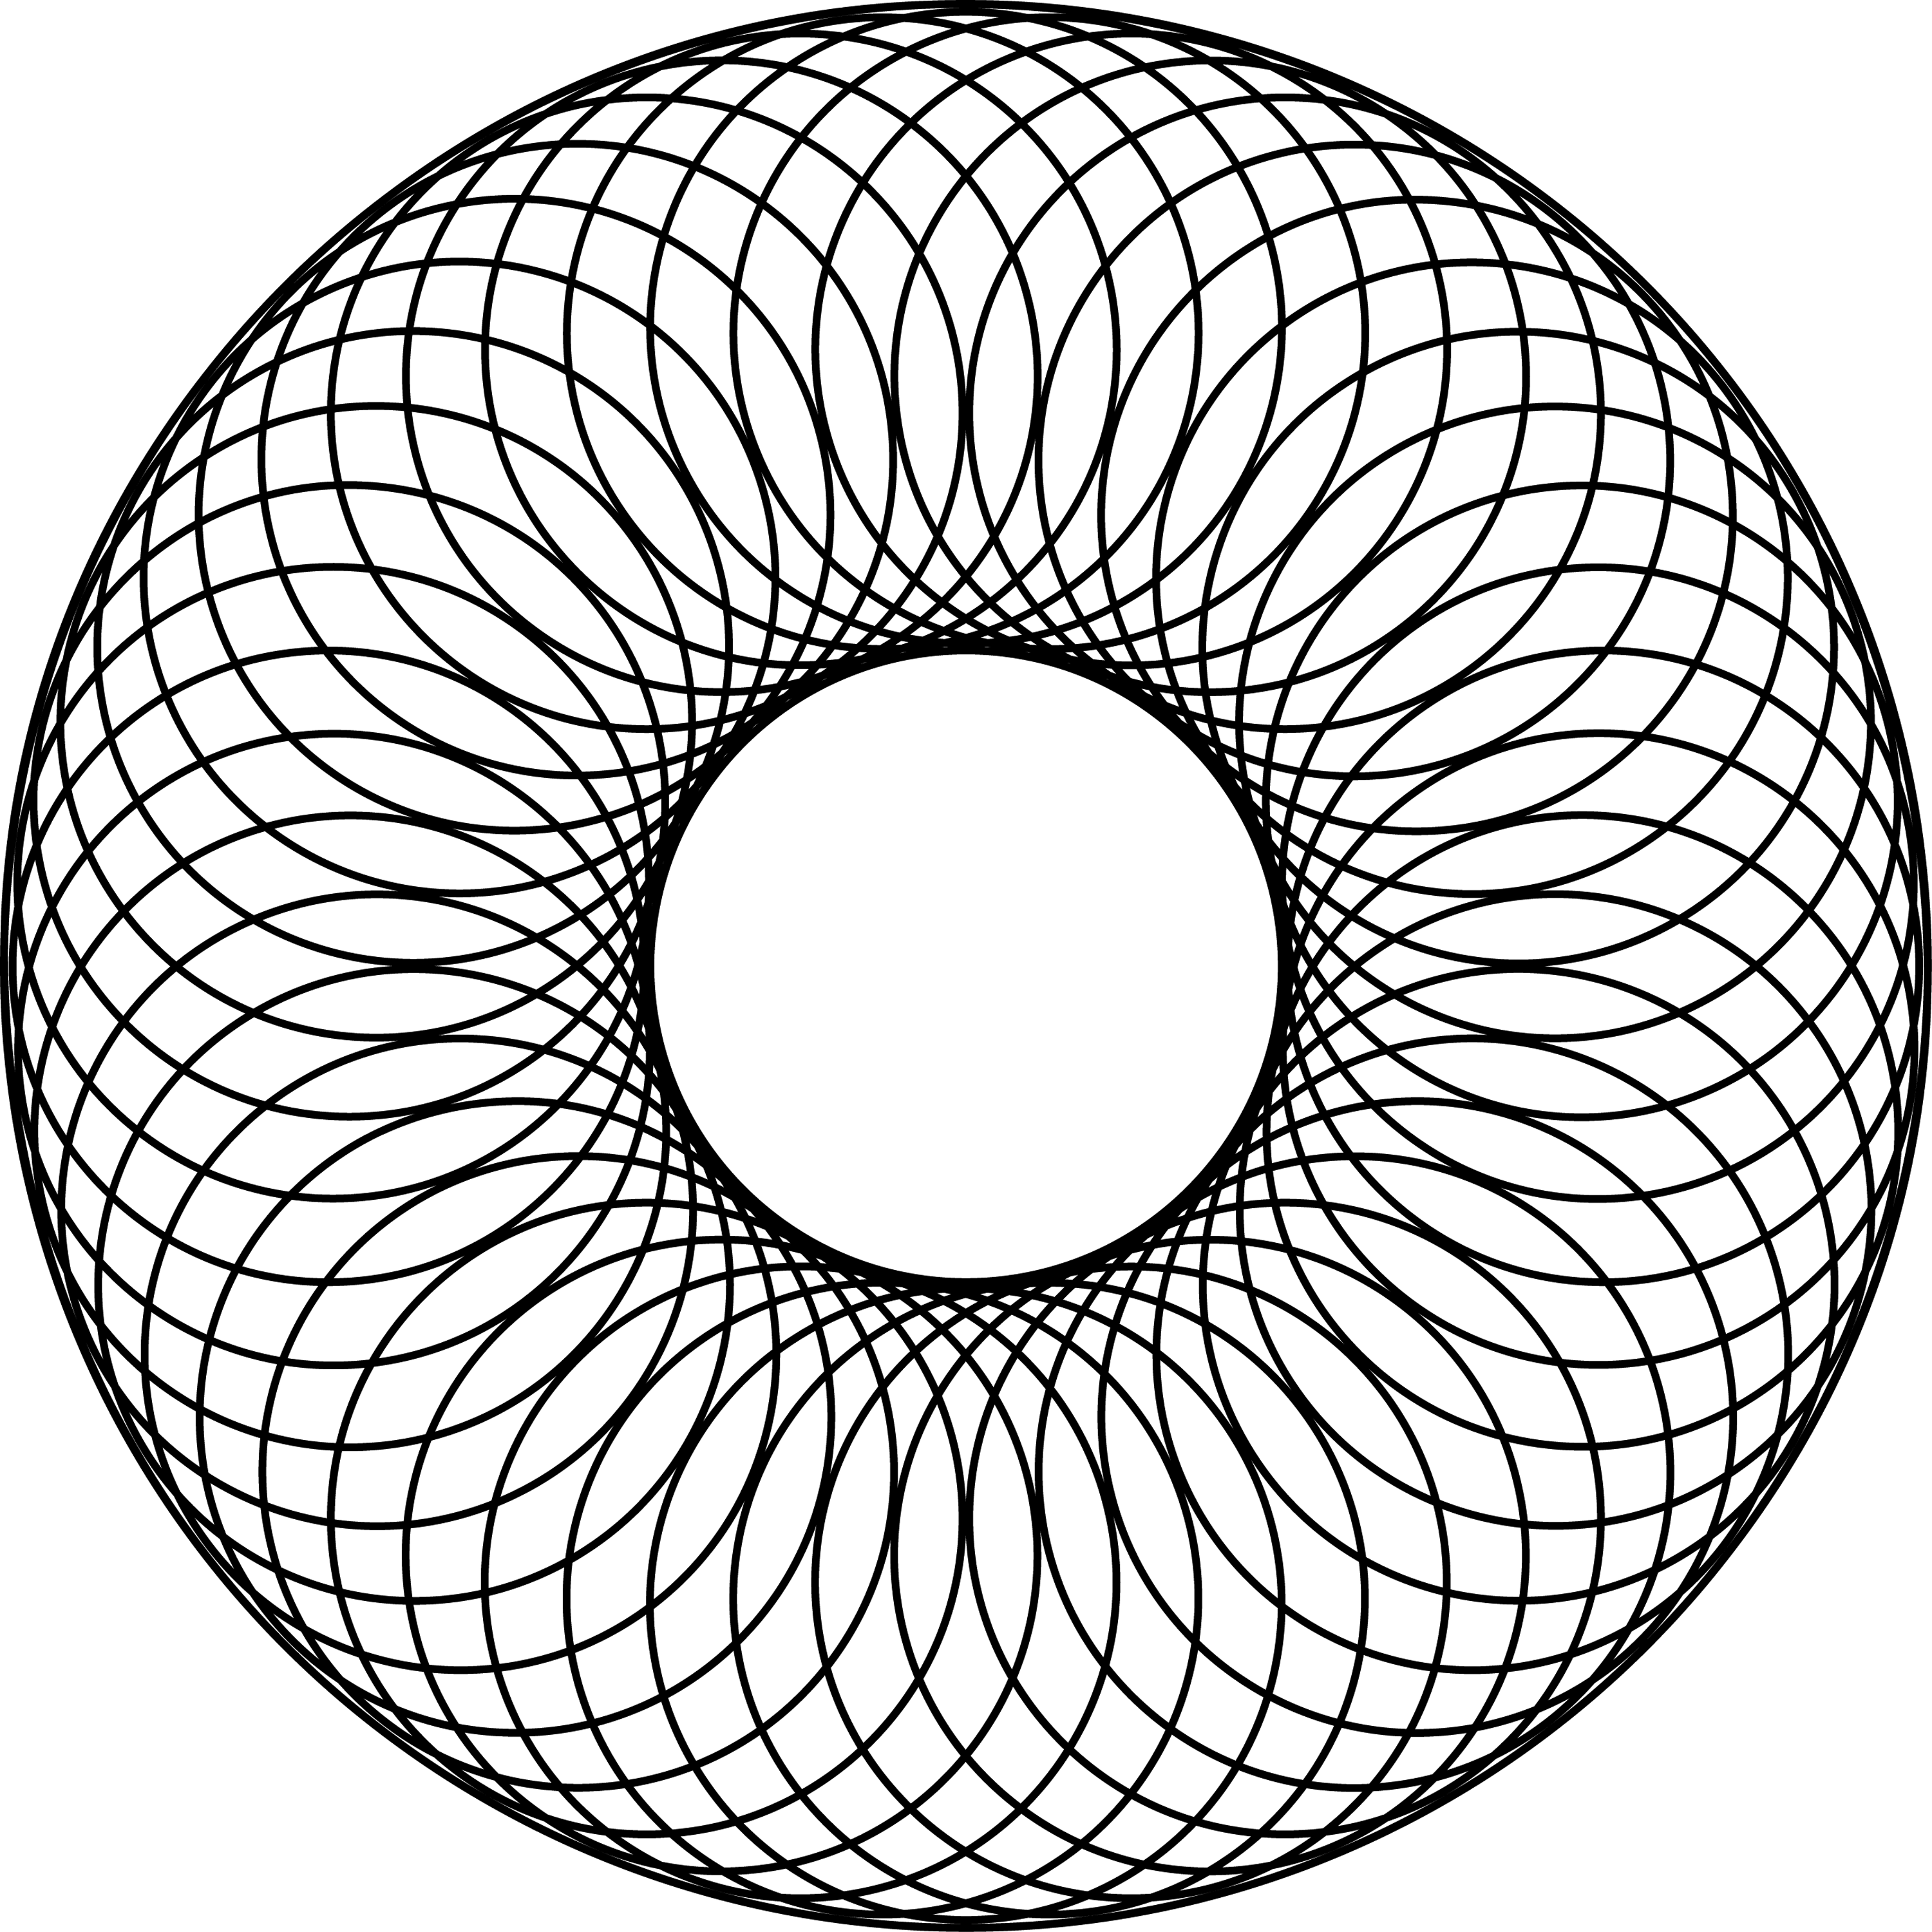 48 Overlapping Circles About A Center Circle And Inside A Larger Circle